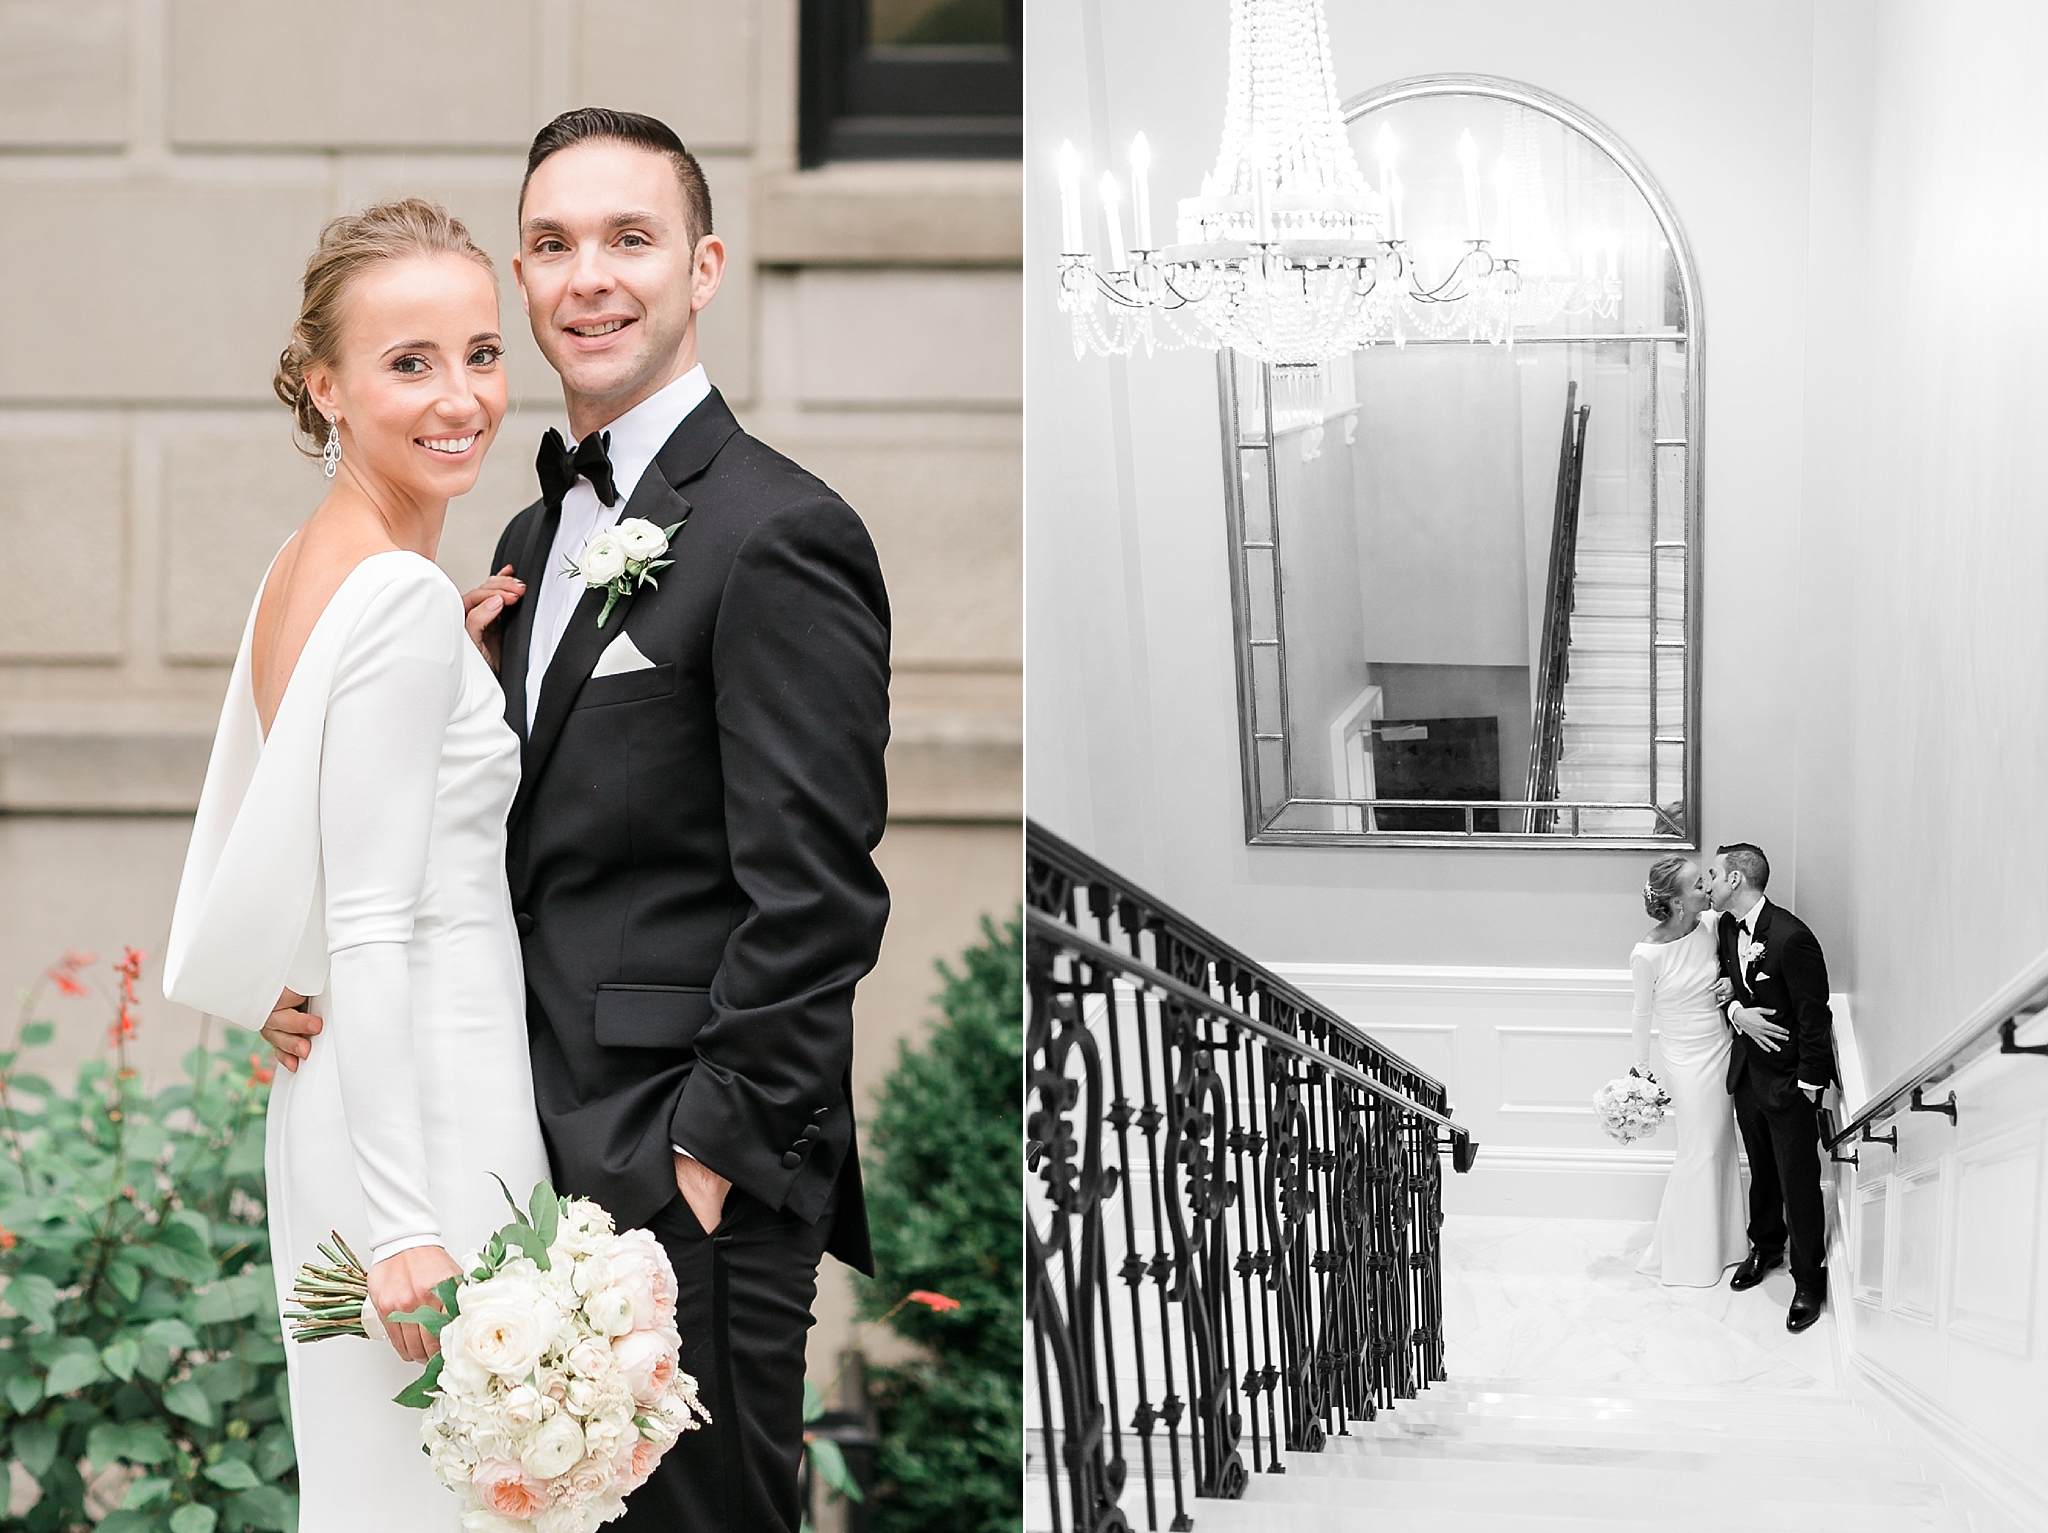 This stunning October wedding was held at St. Matthews Cathedral in Washington, DC with an intimate reception at The Jefferson Hotel.